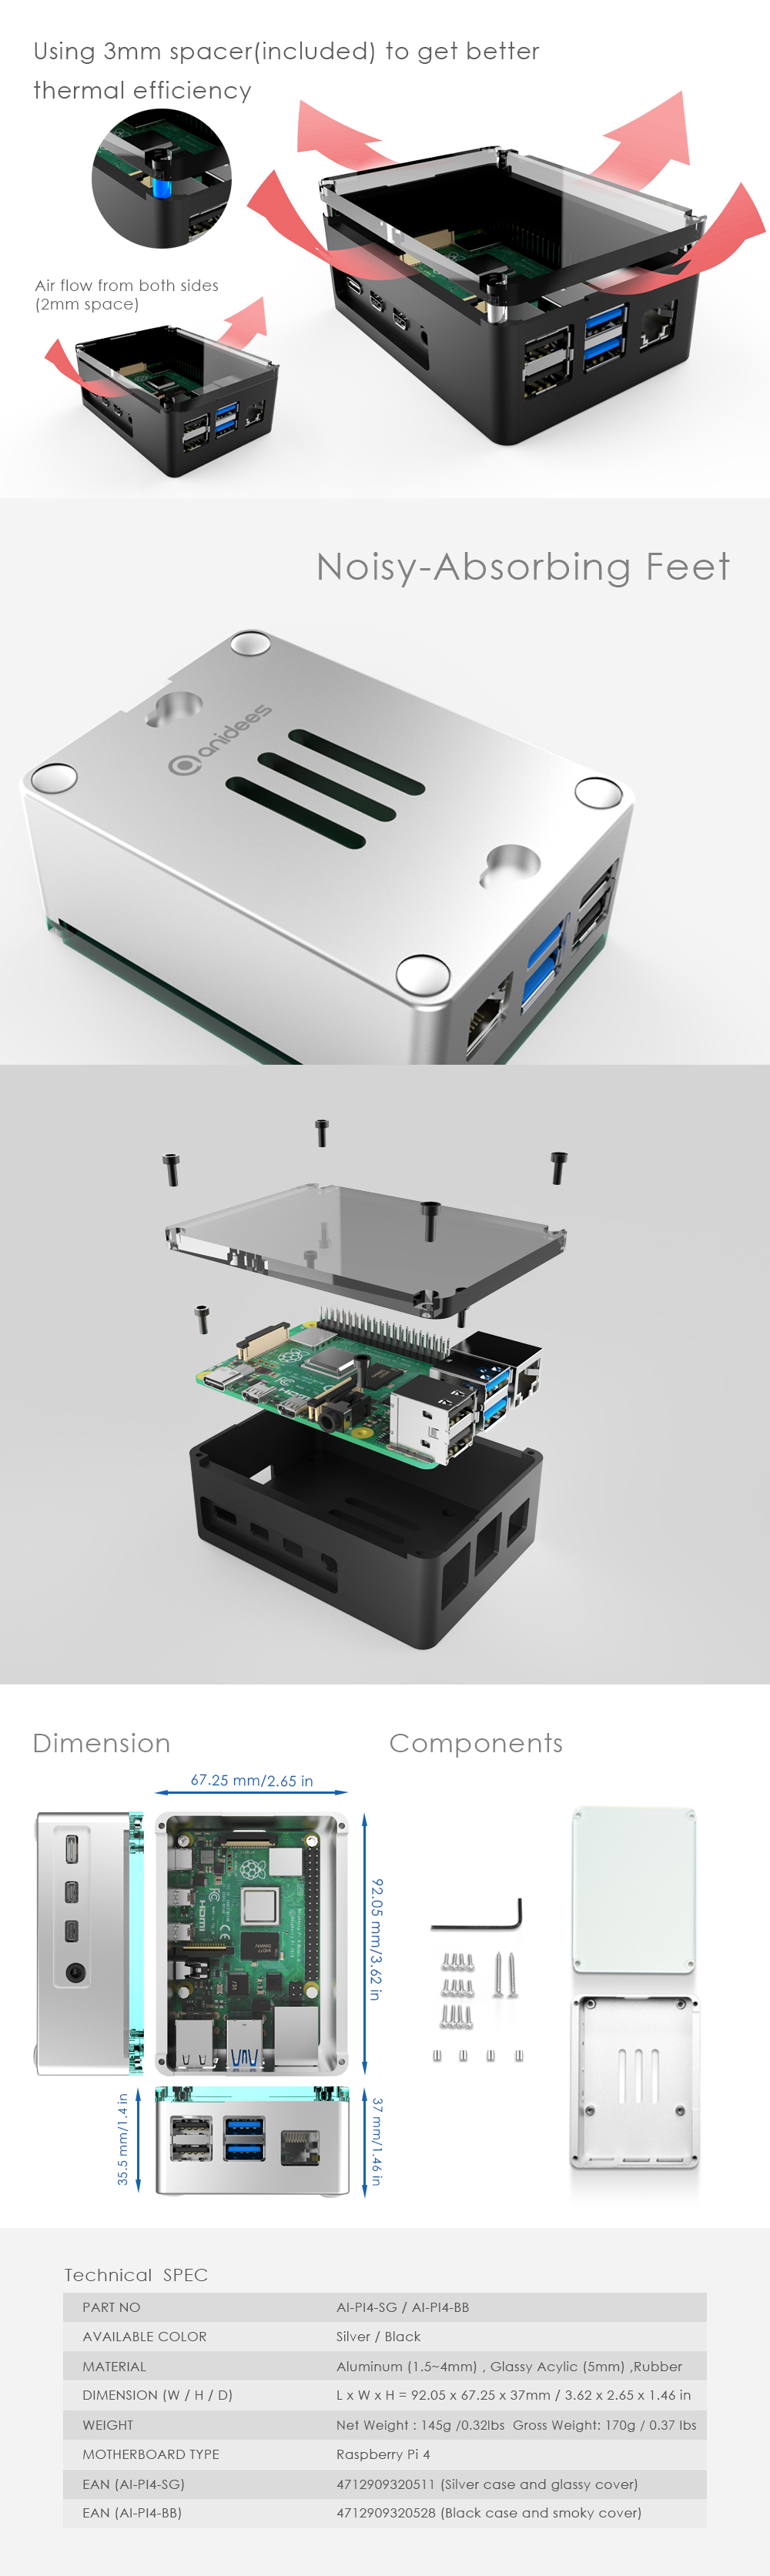 anidees Aluminum Extra High Pi case for Raspberry Pi 4 Model B - Silver